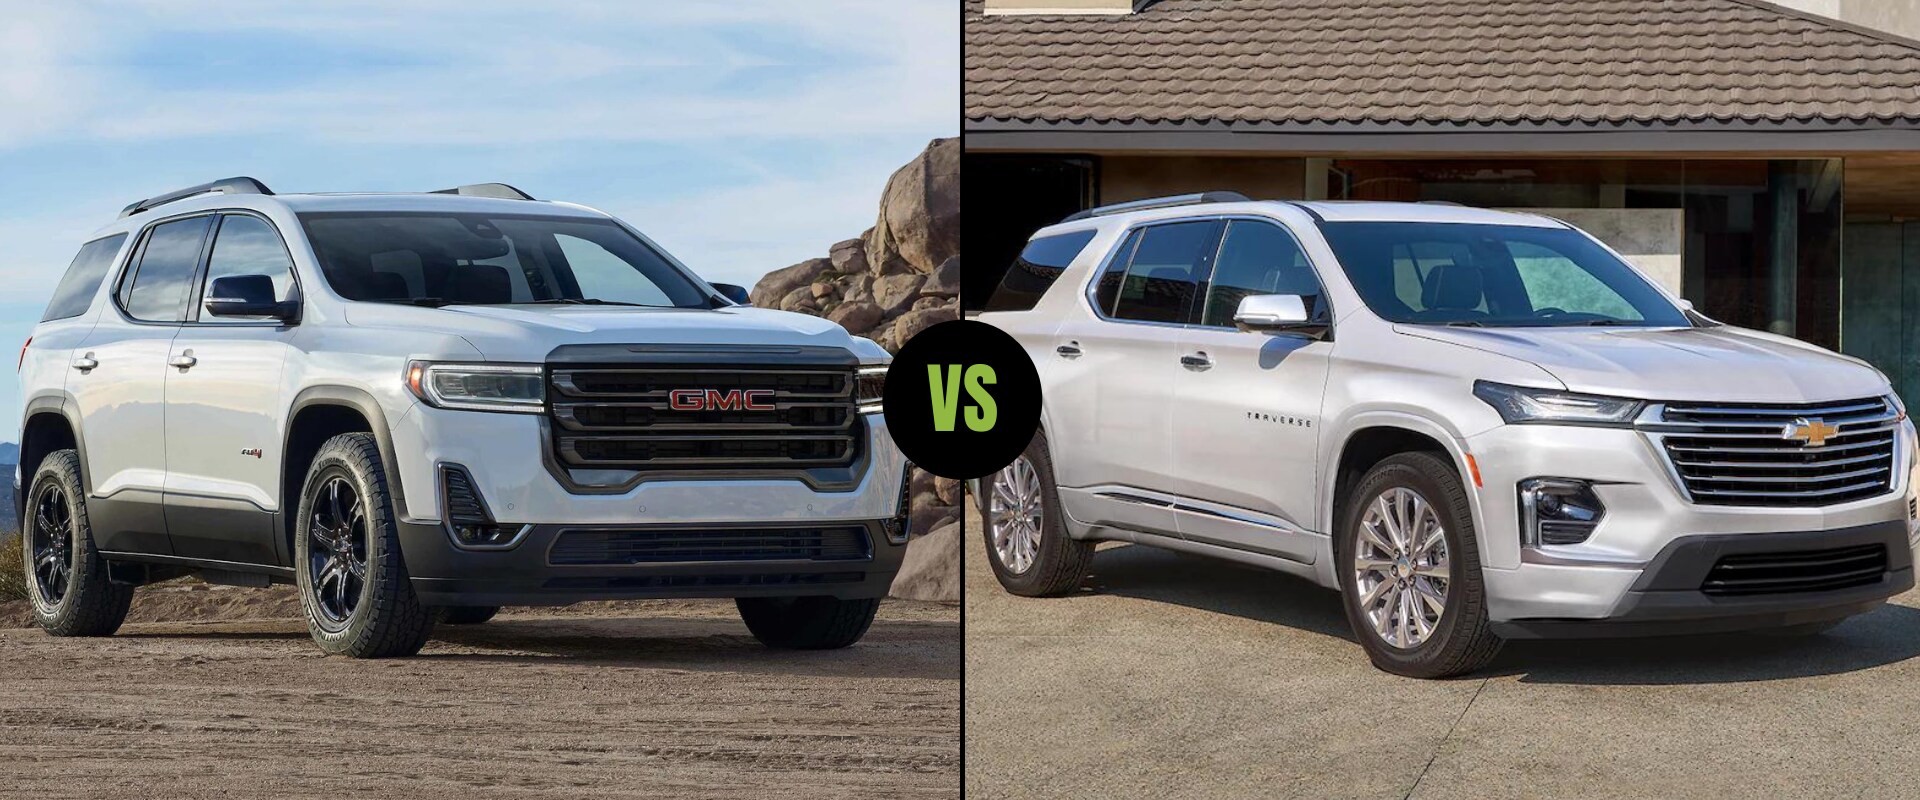 2022 GMC Acadia vs. 2022 Chevy Traverse Which SUV Should You Buy